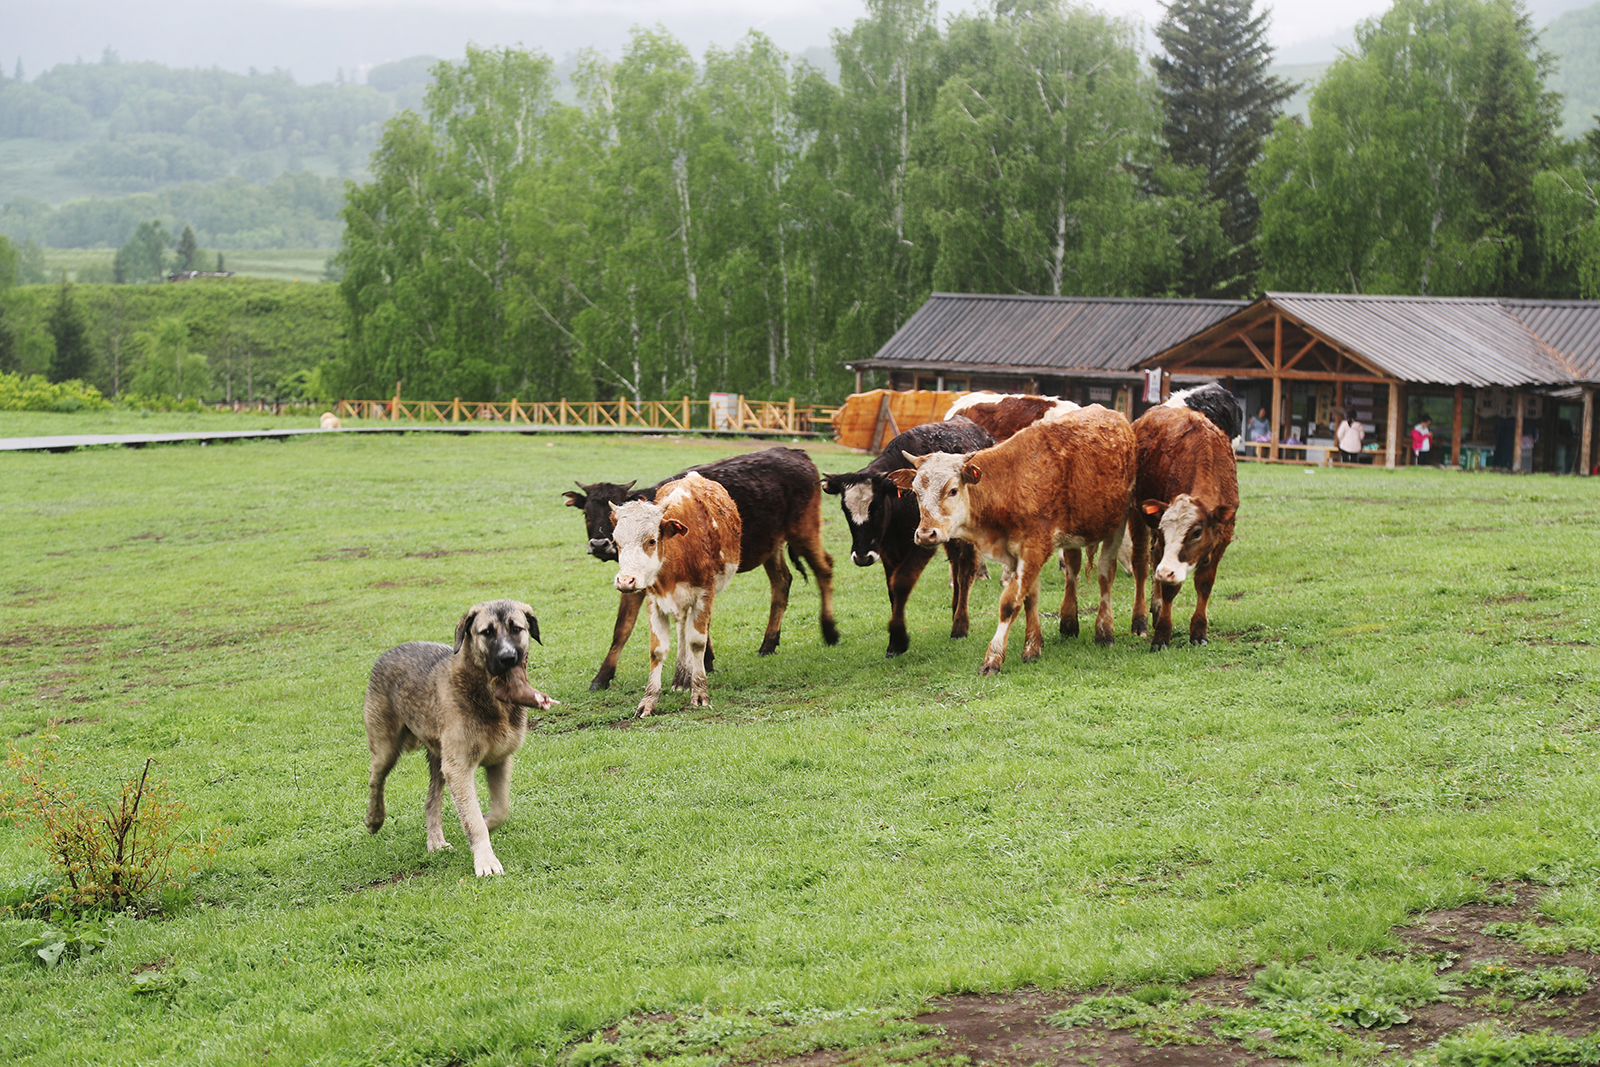 Cows stare at a dog with a gigot in its mouth in Hemu Village in Altay, Xinjiang. /CGTN